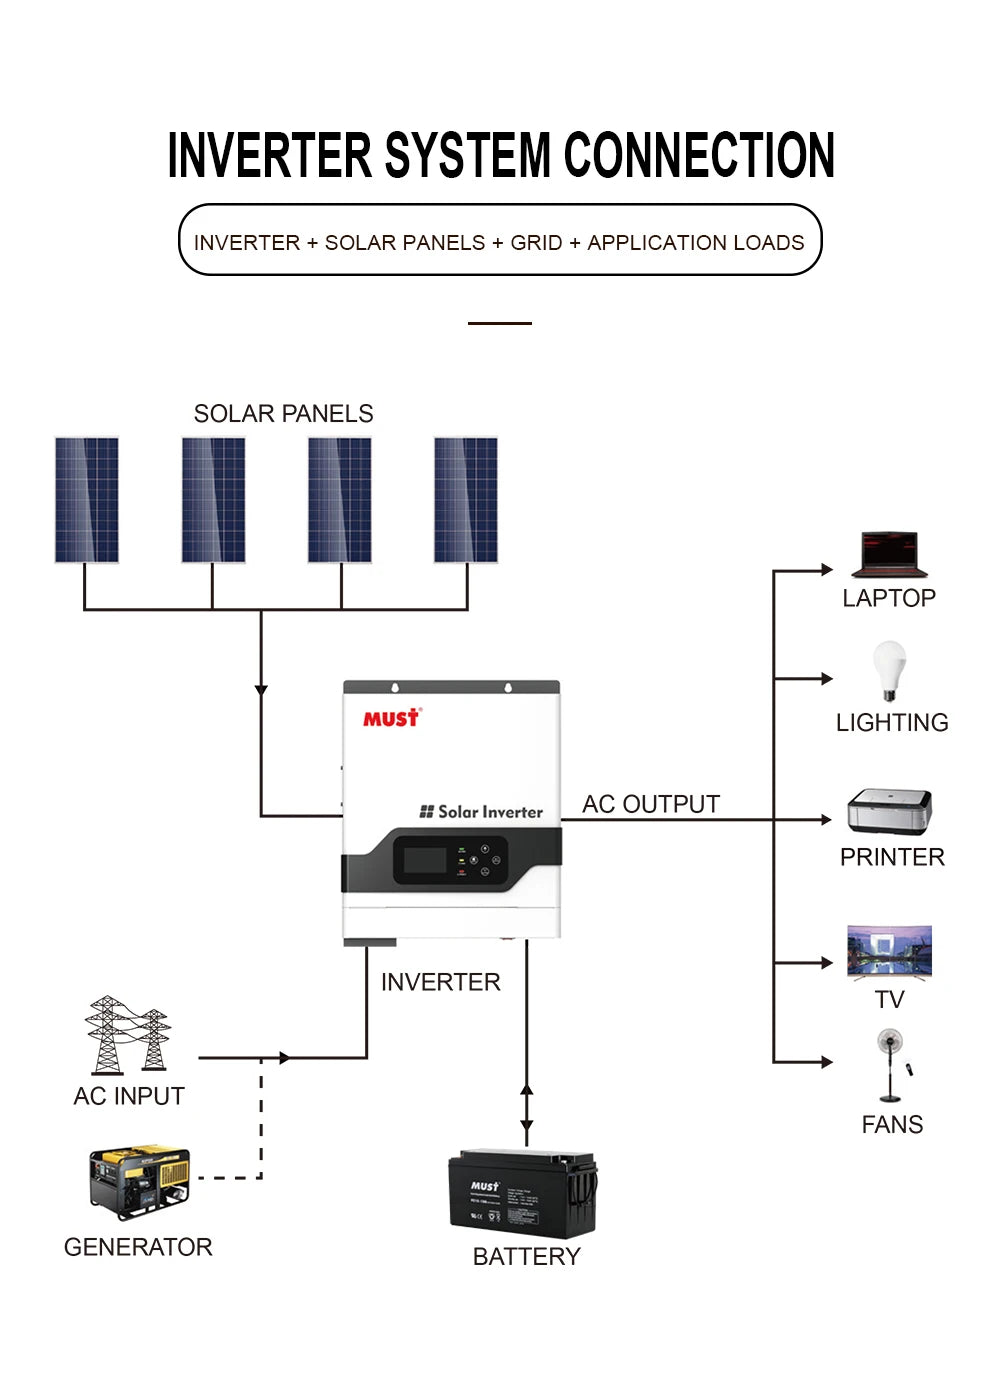 Connect solar panels to a hybrid off-grid inverter for grid-independent power and charging.